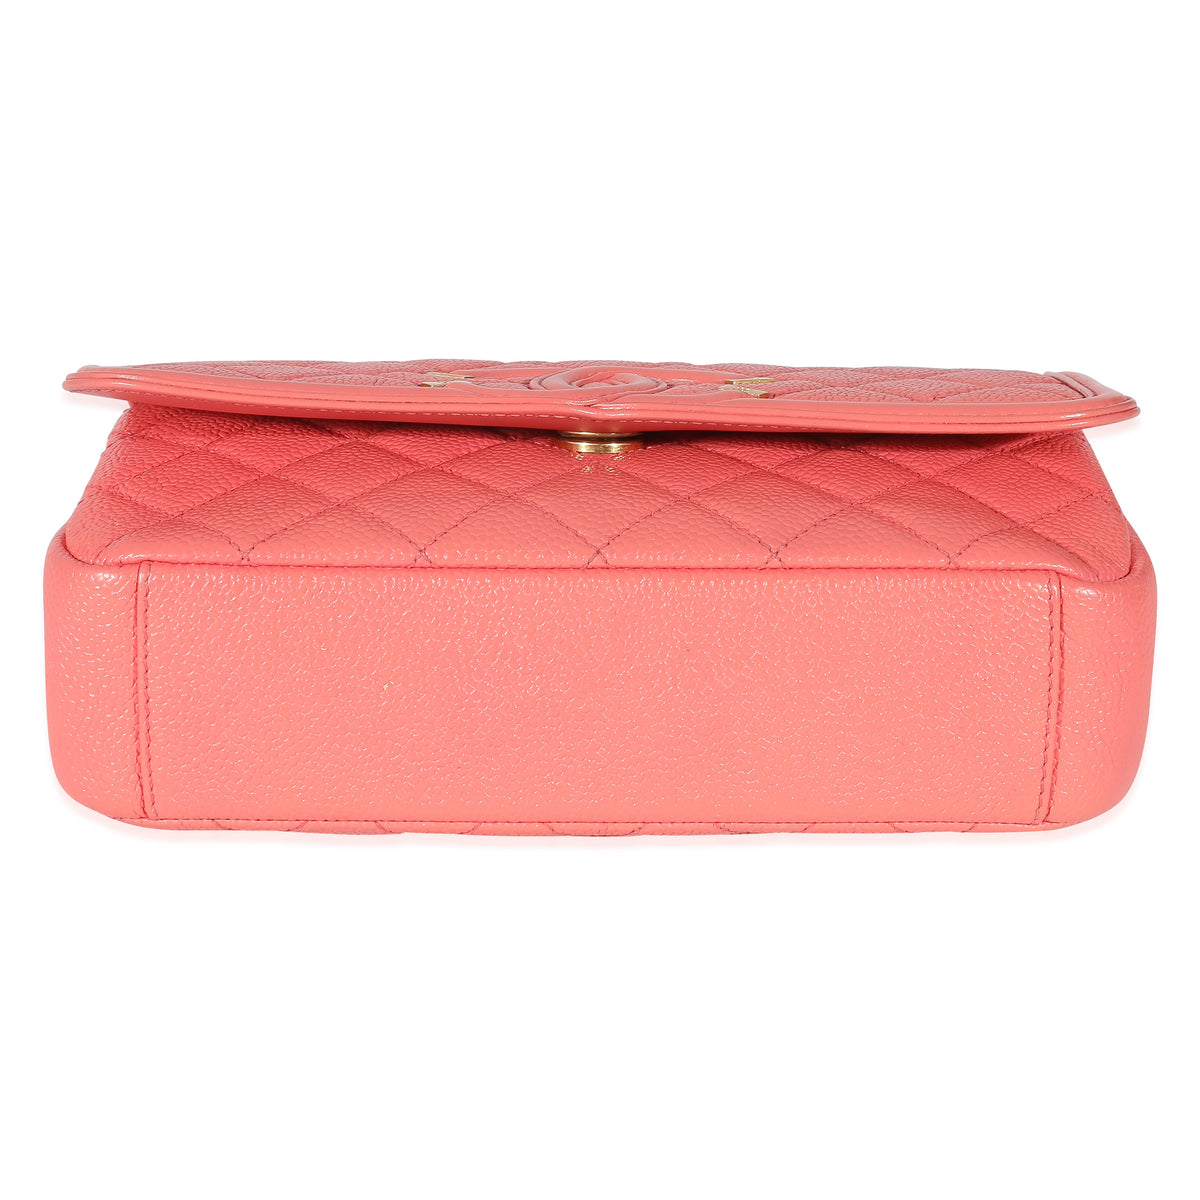 Chanel - Pink Quilted Caviar Filigree Compact Wallet